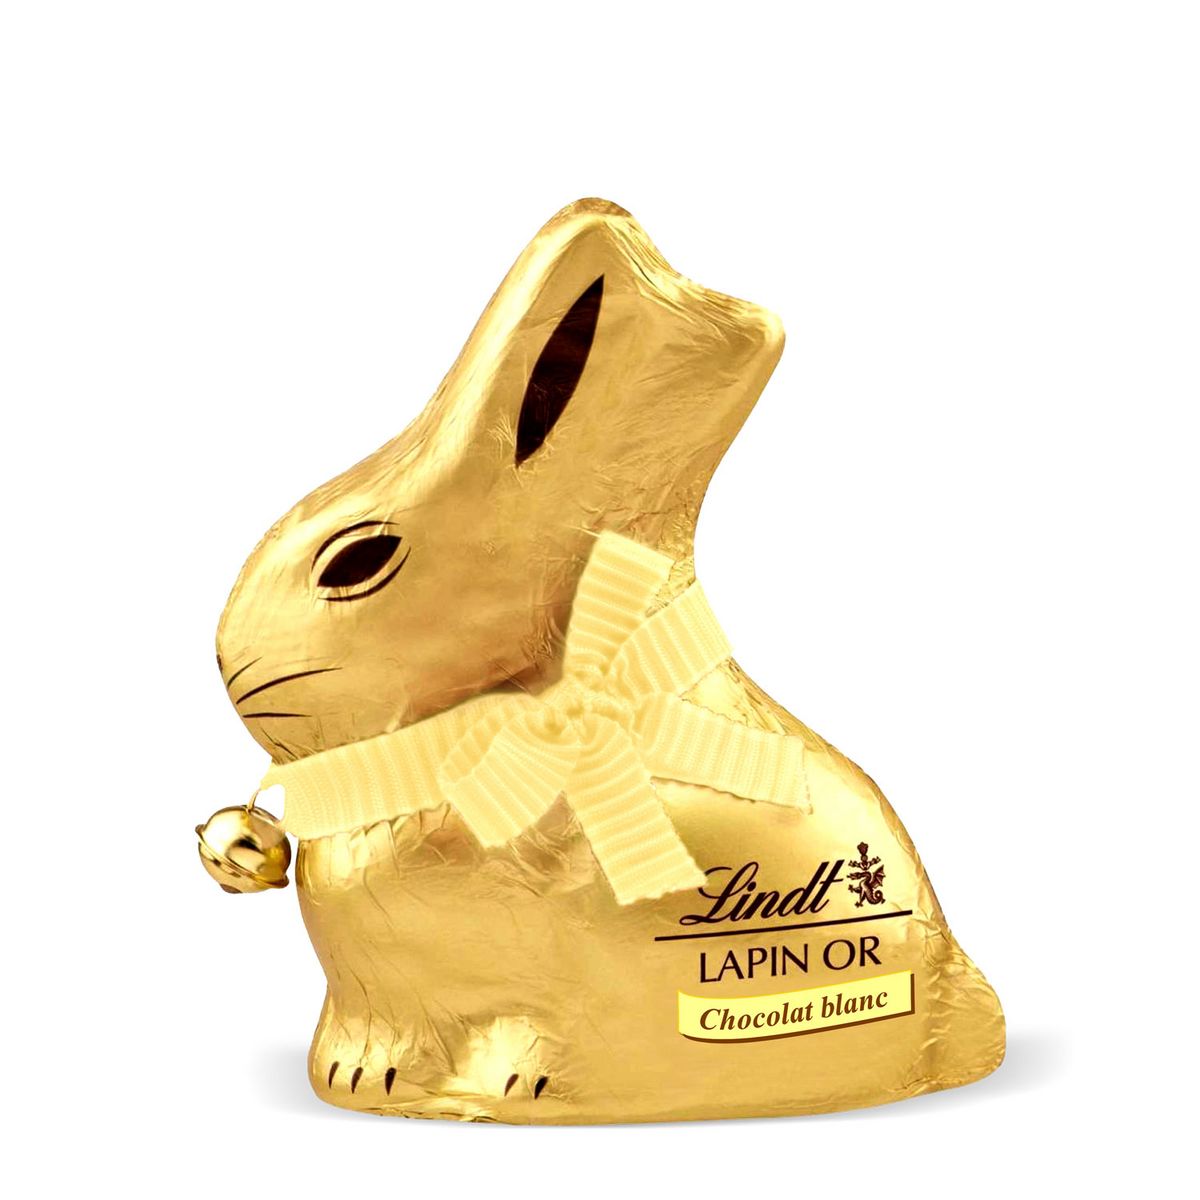 LINDT Lapin Or moulage chocolat blanc 1 pièce 100g